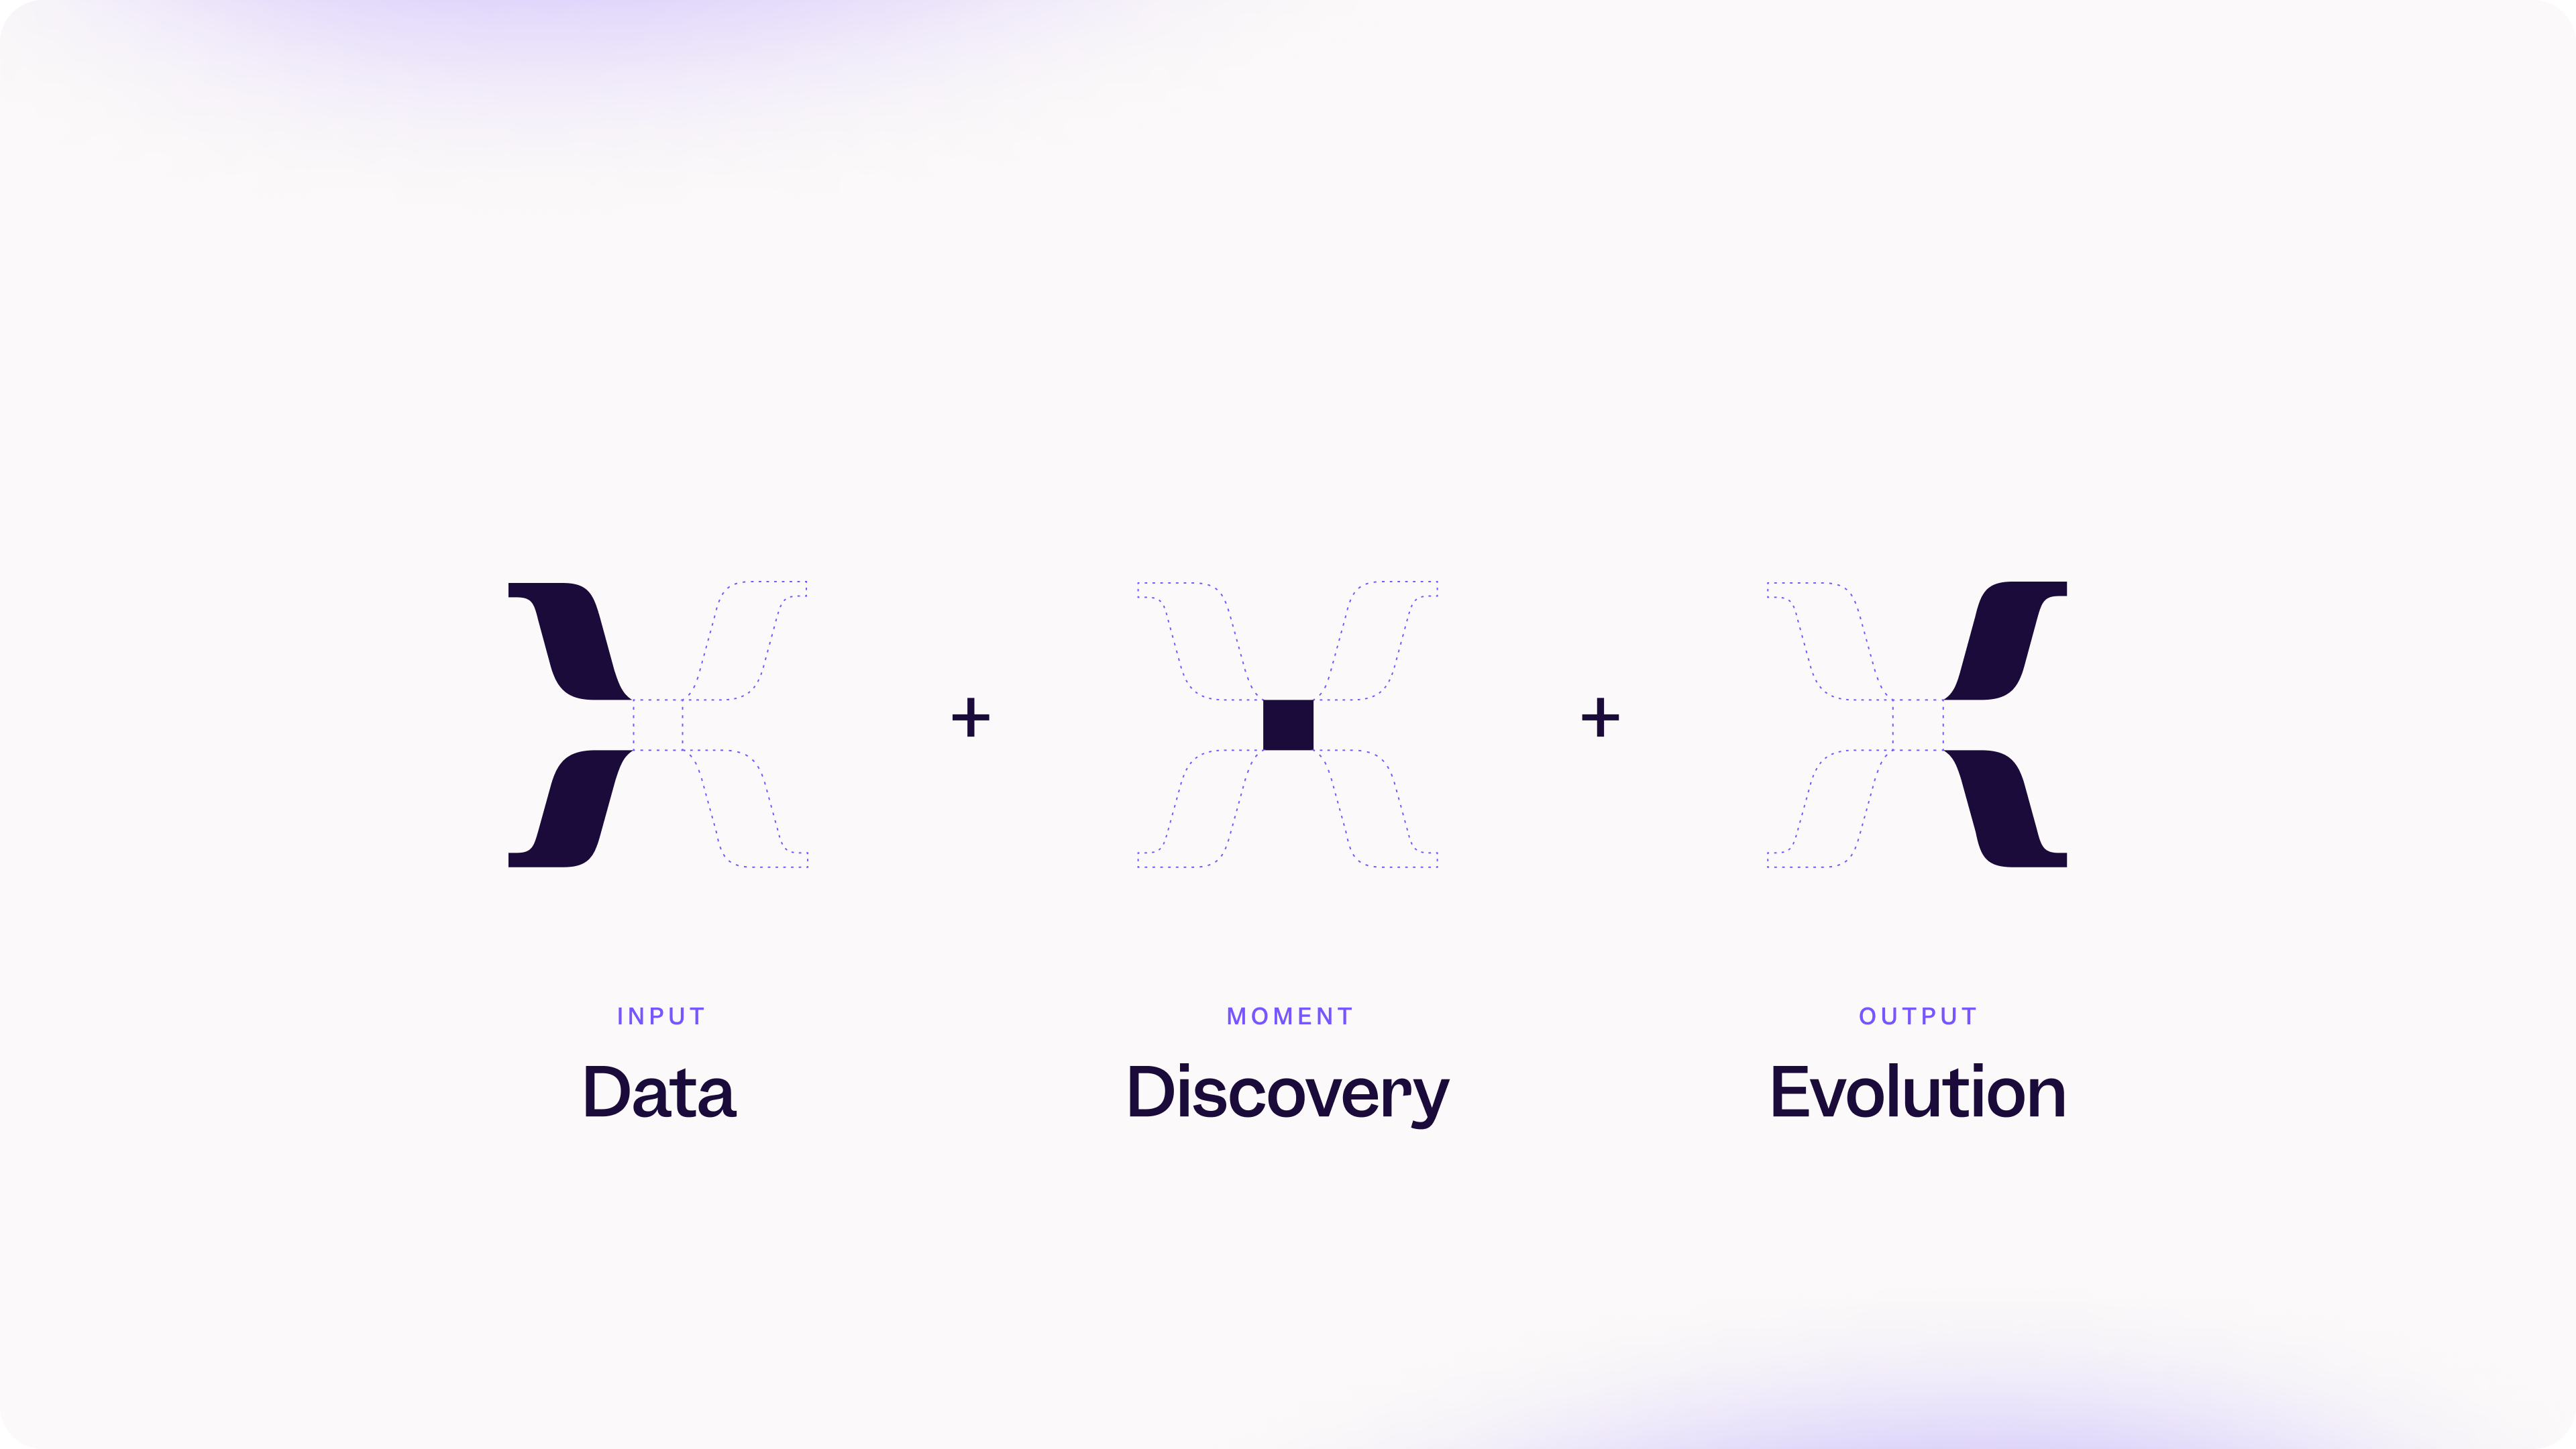 A breakdown of Mixpanel's new logo centerpiece: the X. Its left side represents Data, its center square represents Discovery, and its right side represents Evolution.